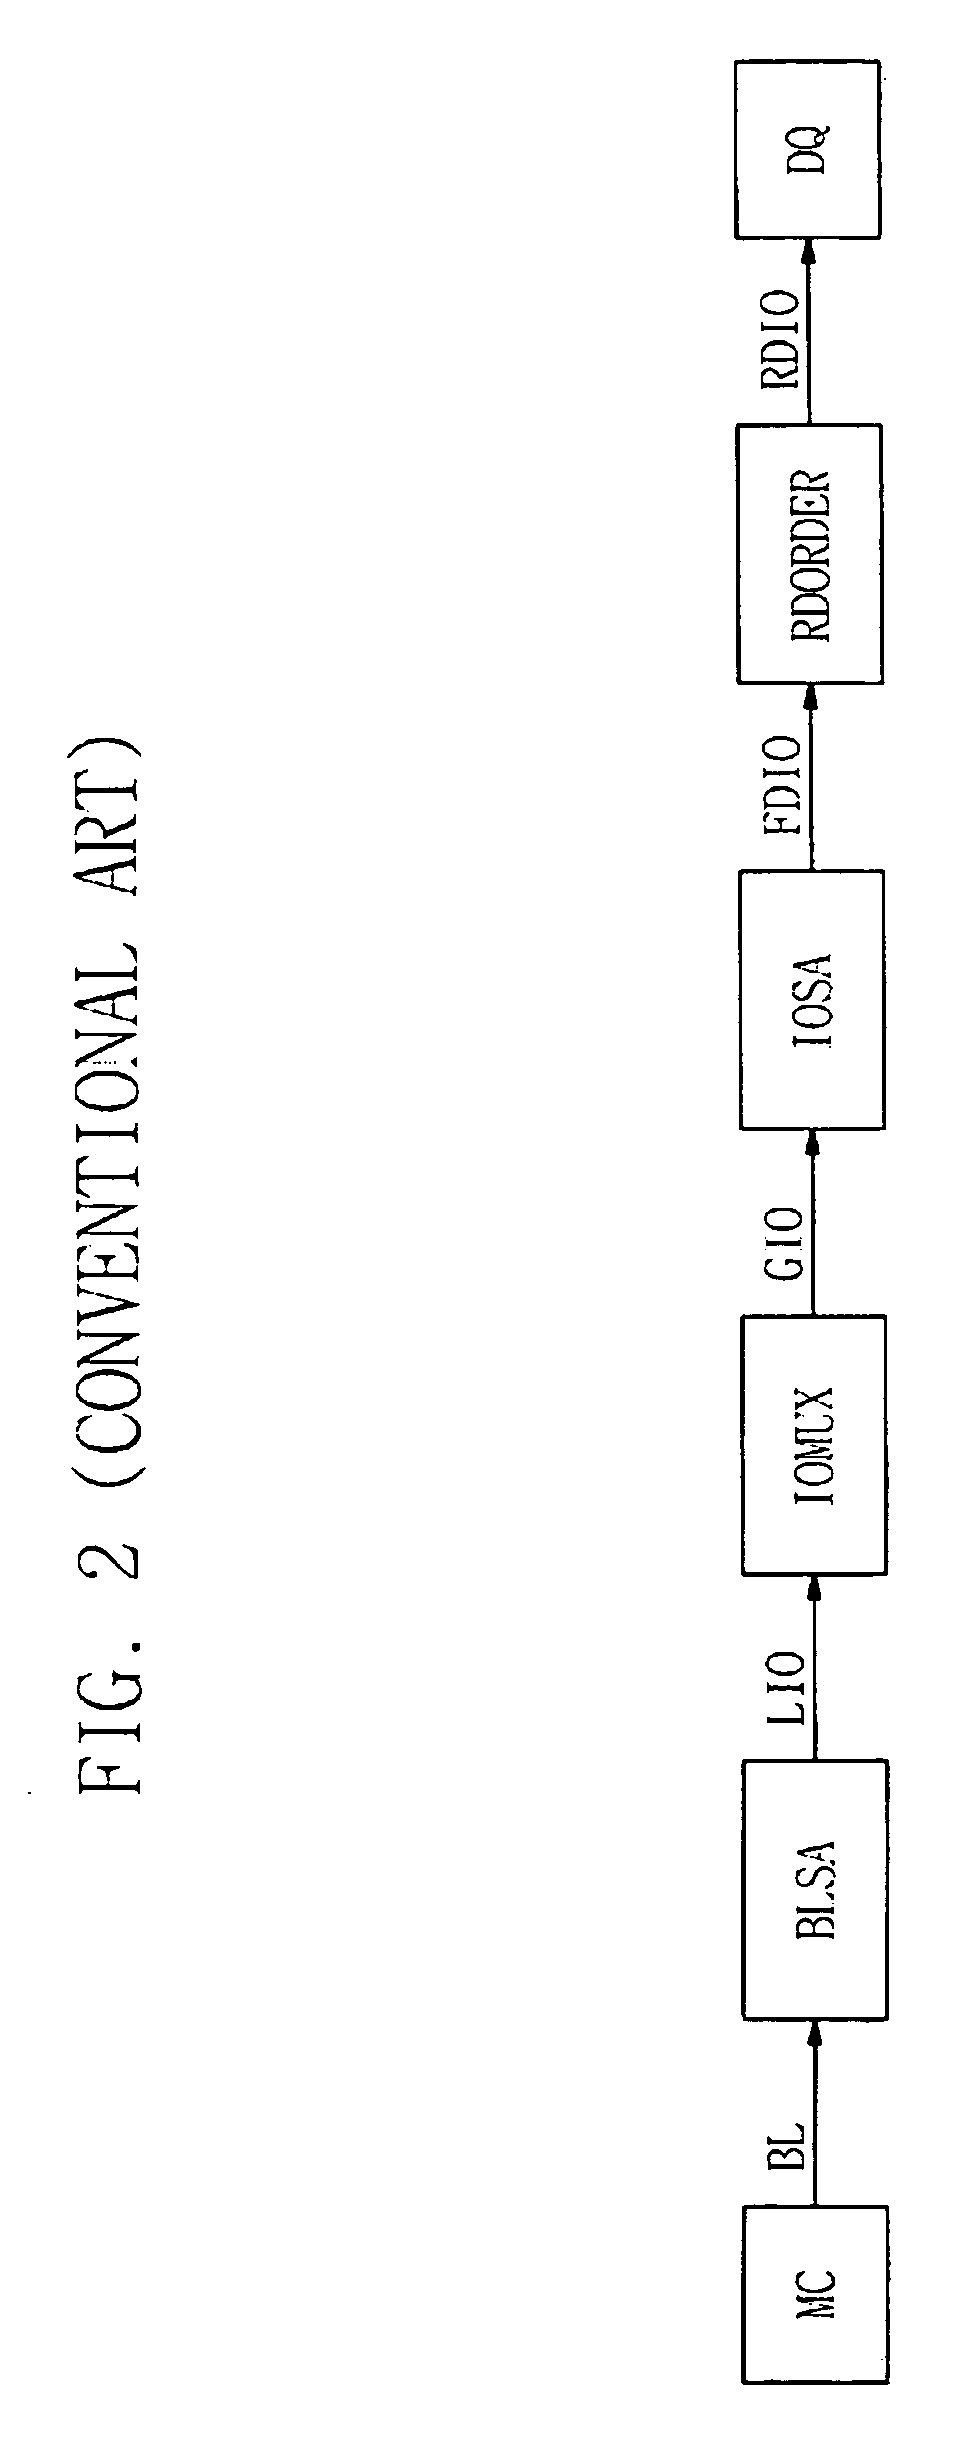 Layout structure of semiconductor memory device having iosa